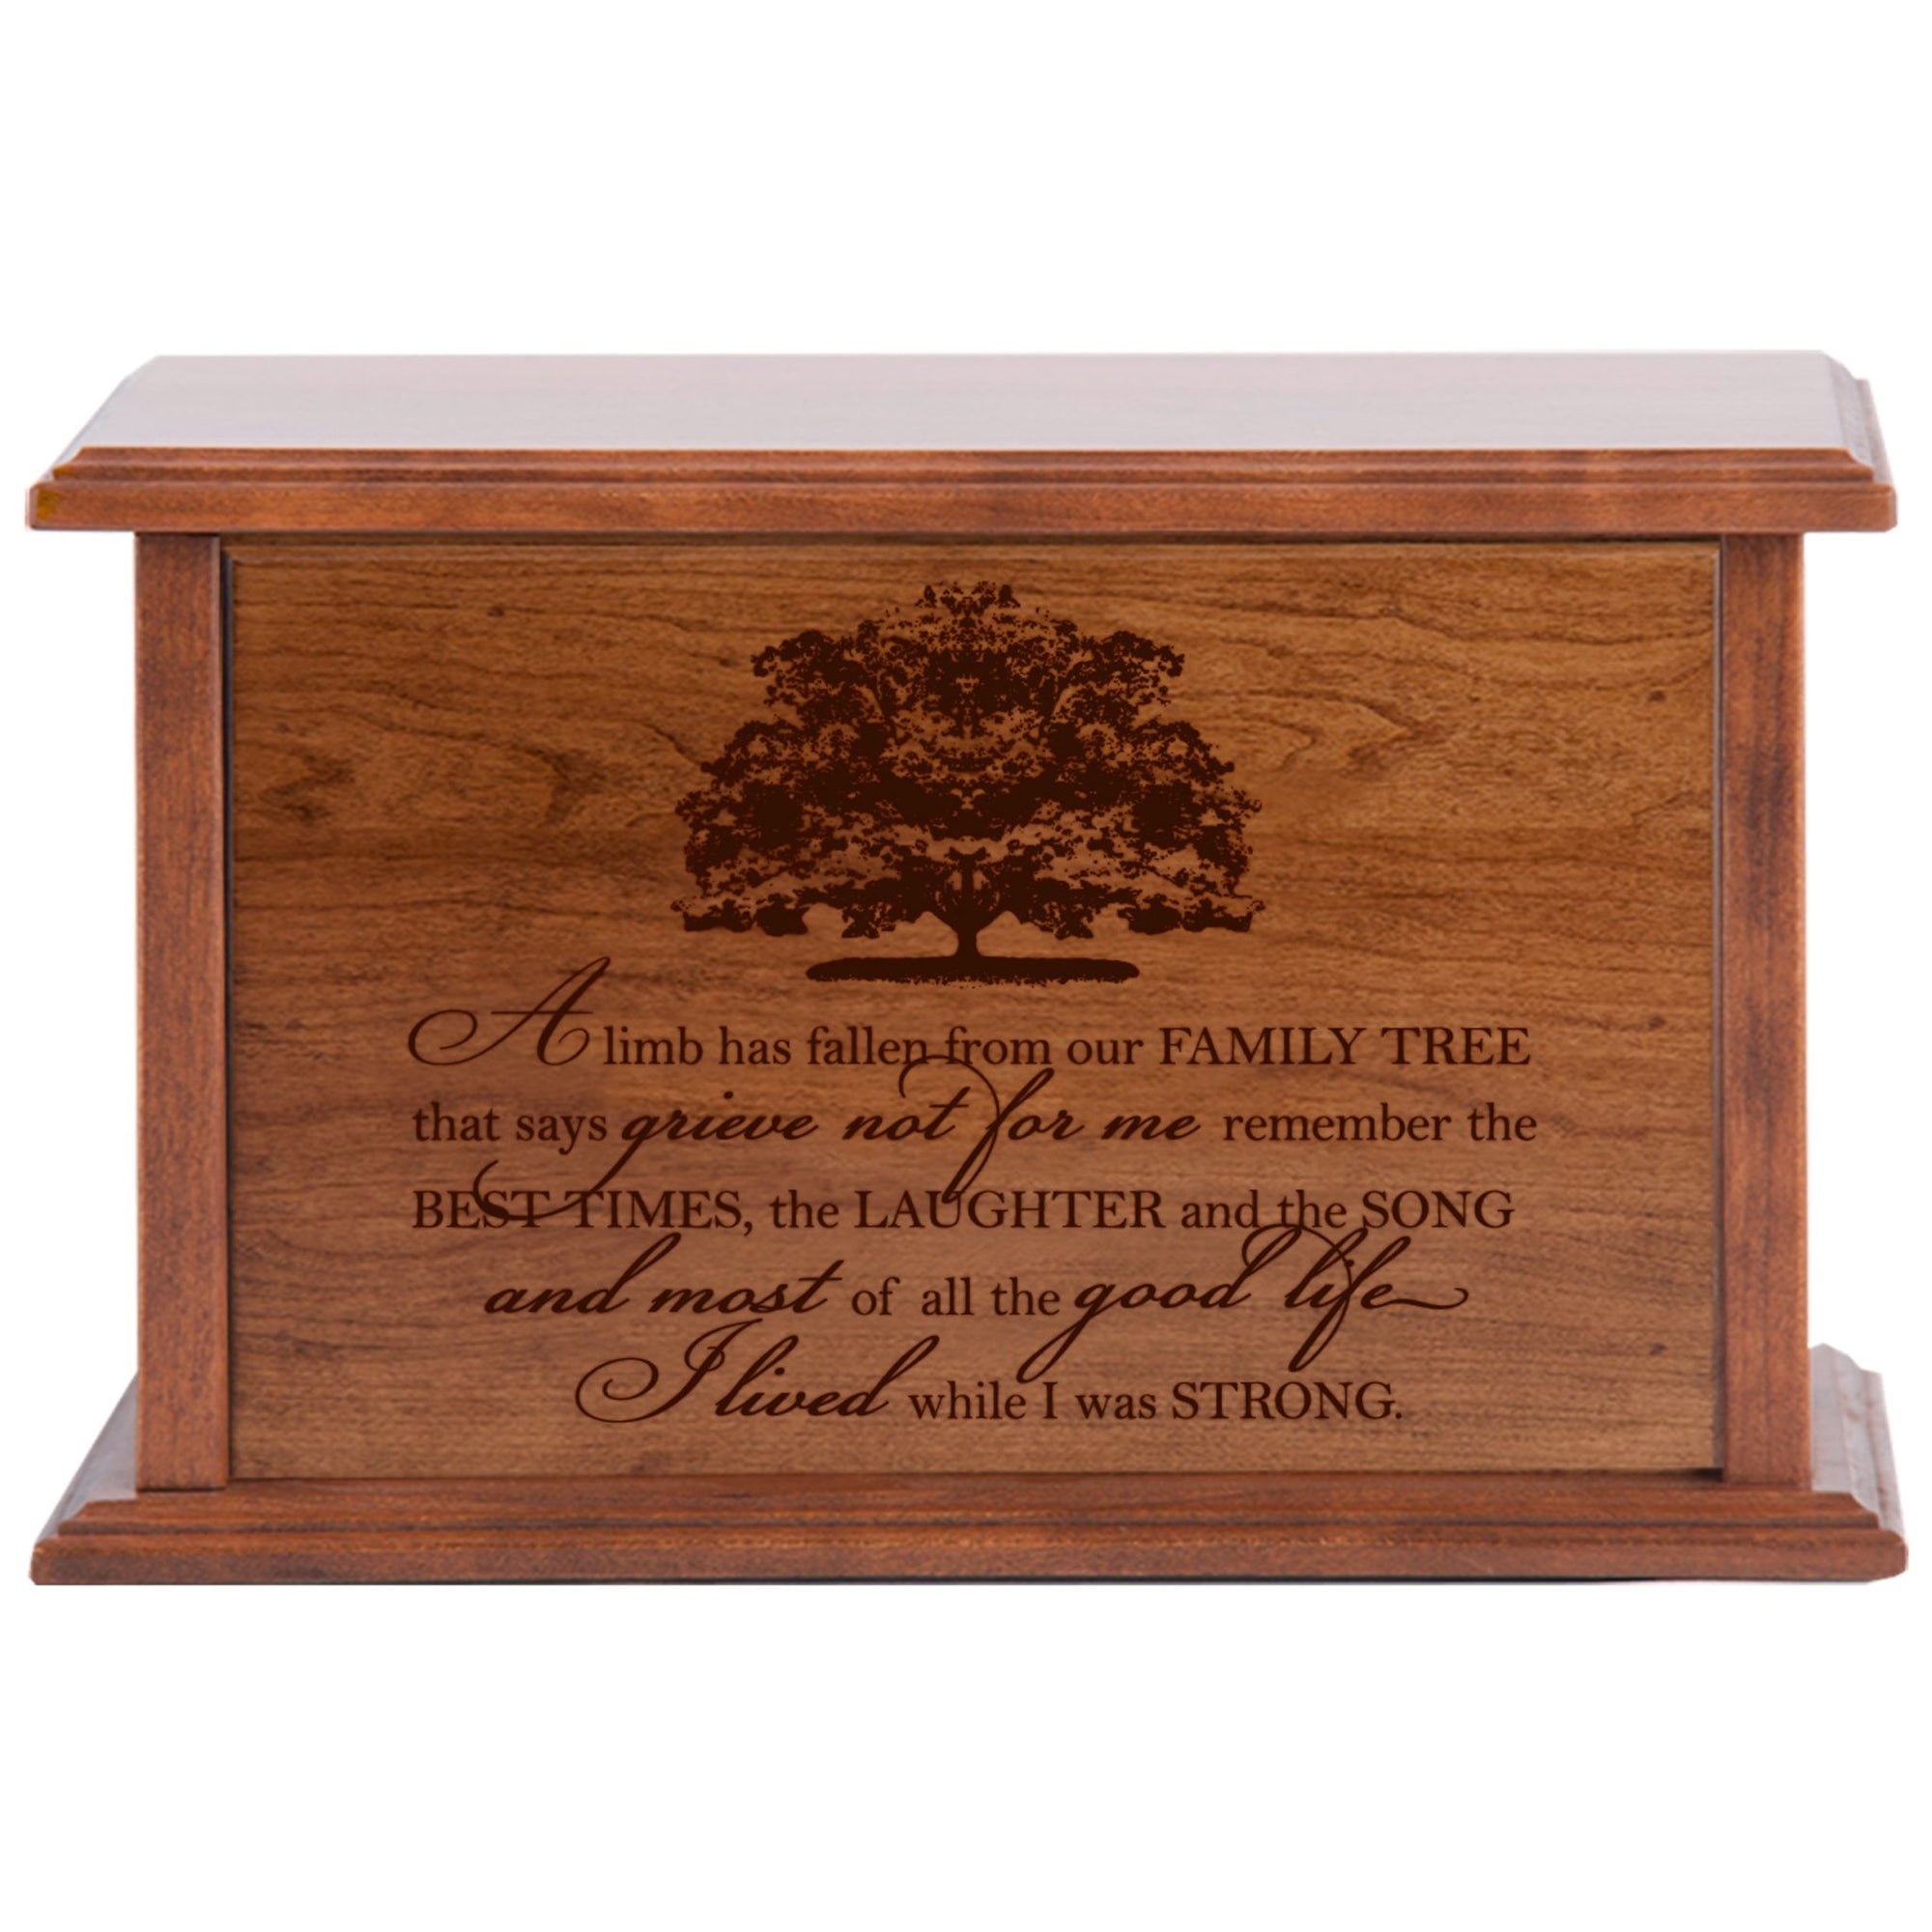 Memorial Engraved Cremation Urn Box for Human Ashes